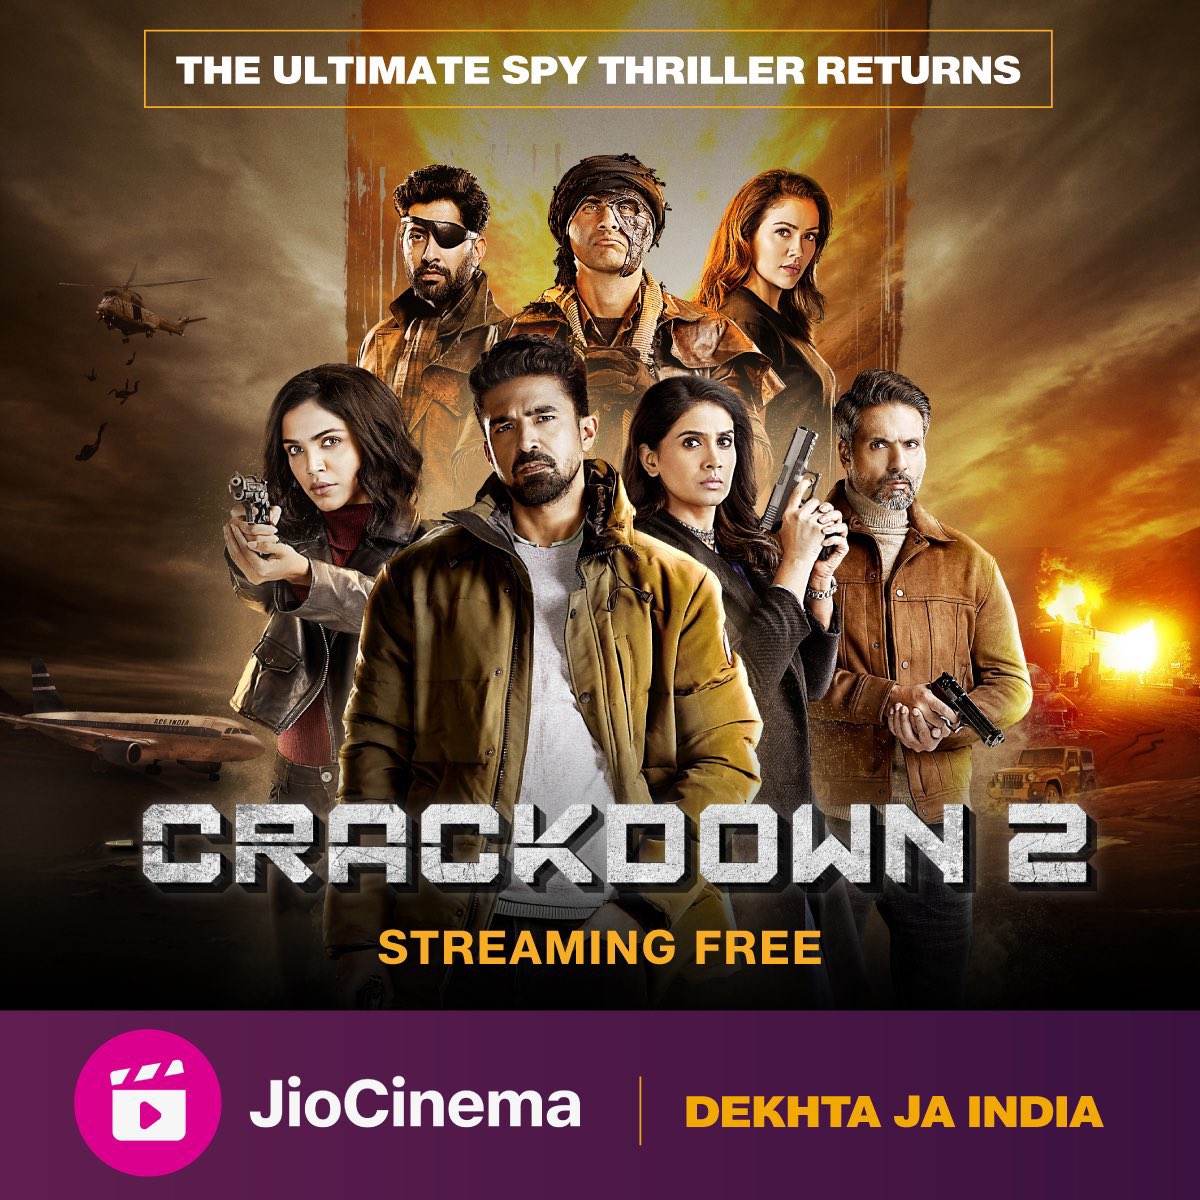 Done with 2 Episodes of #Crackdown2onJioCinema  

#SpecialOps & #TheFamilyMan has set the Bar very high for Spy Thrillers.. 

#CrackDown2 looks very cheap in production value & quite outdated in terms of story telling..  Huge Let down